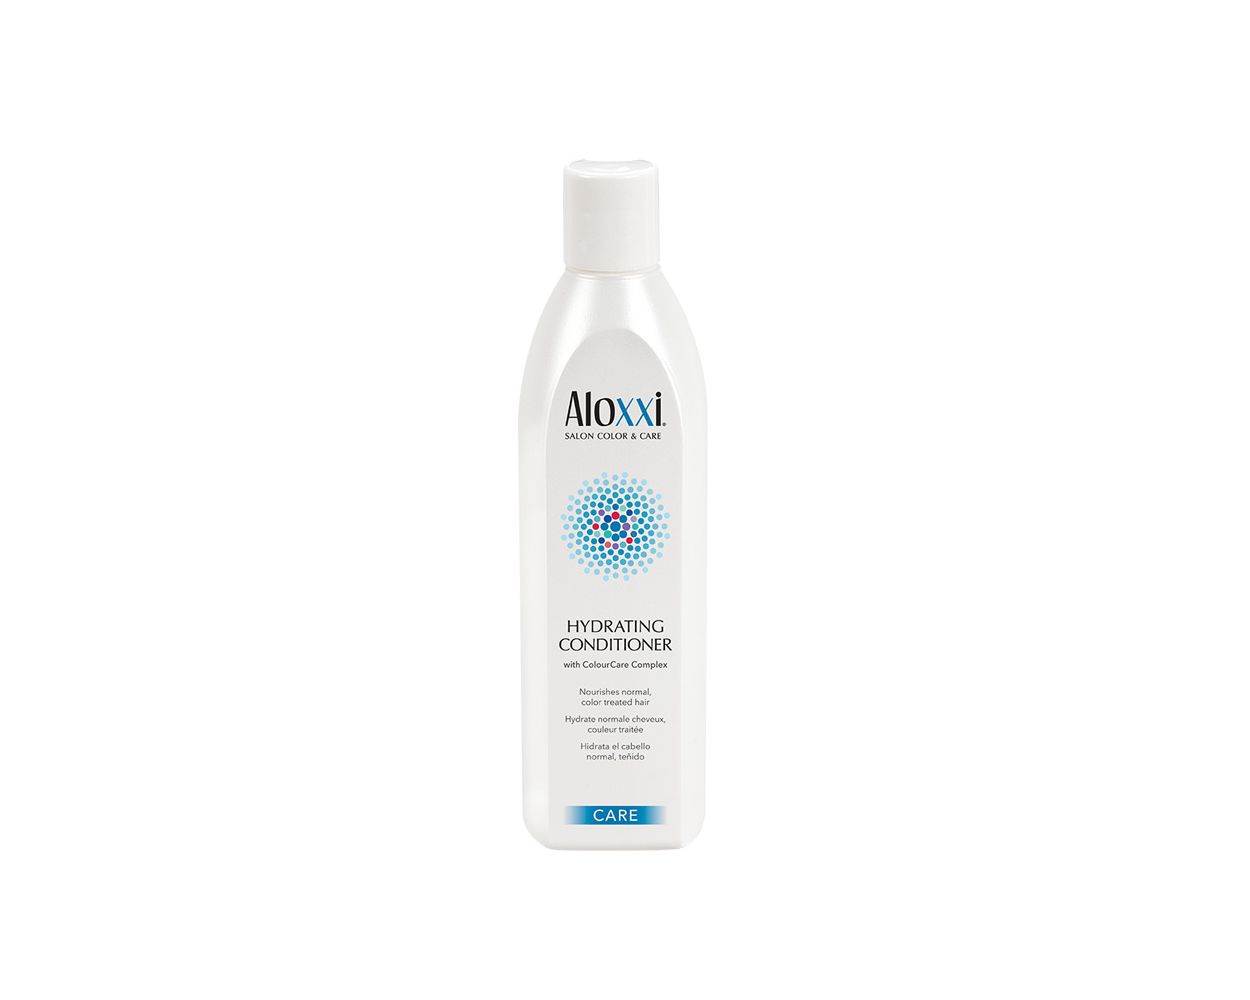 ALOXXI HYDRATING CONDITIONER 300ml